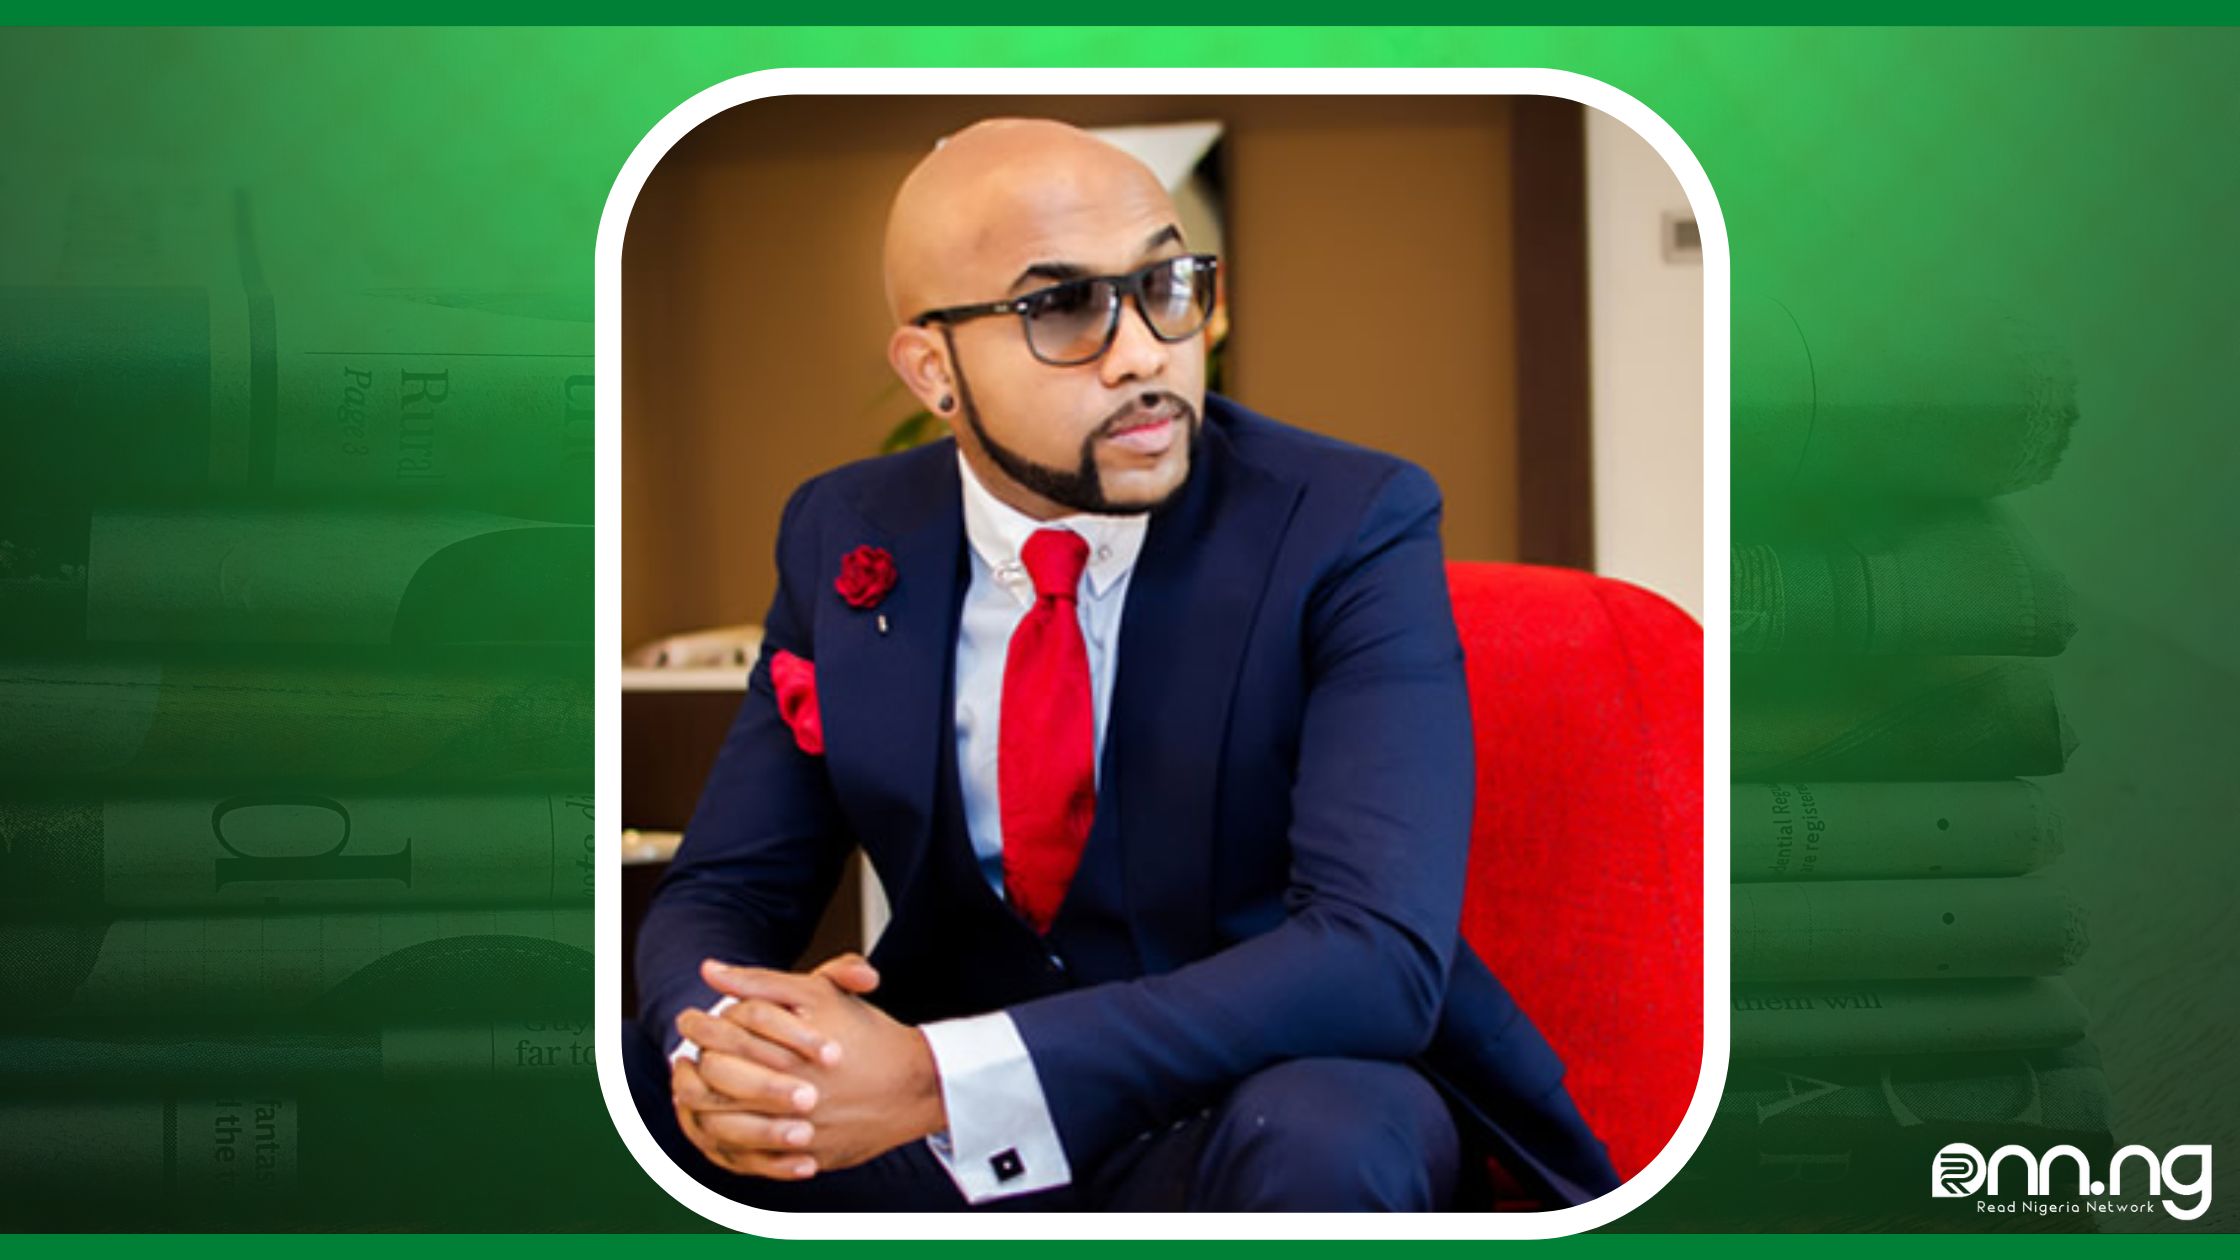 Banky W Bio, Age, Wife, Children, Career, And Net Worth